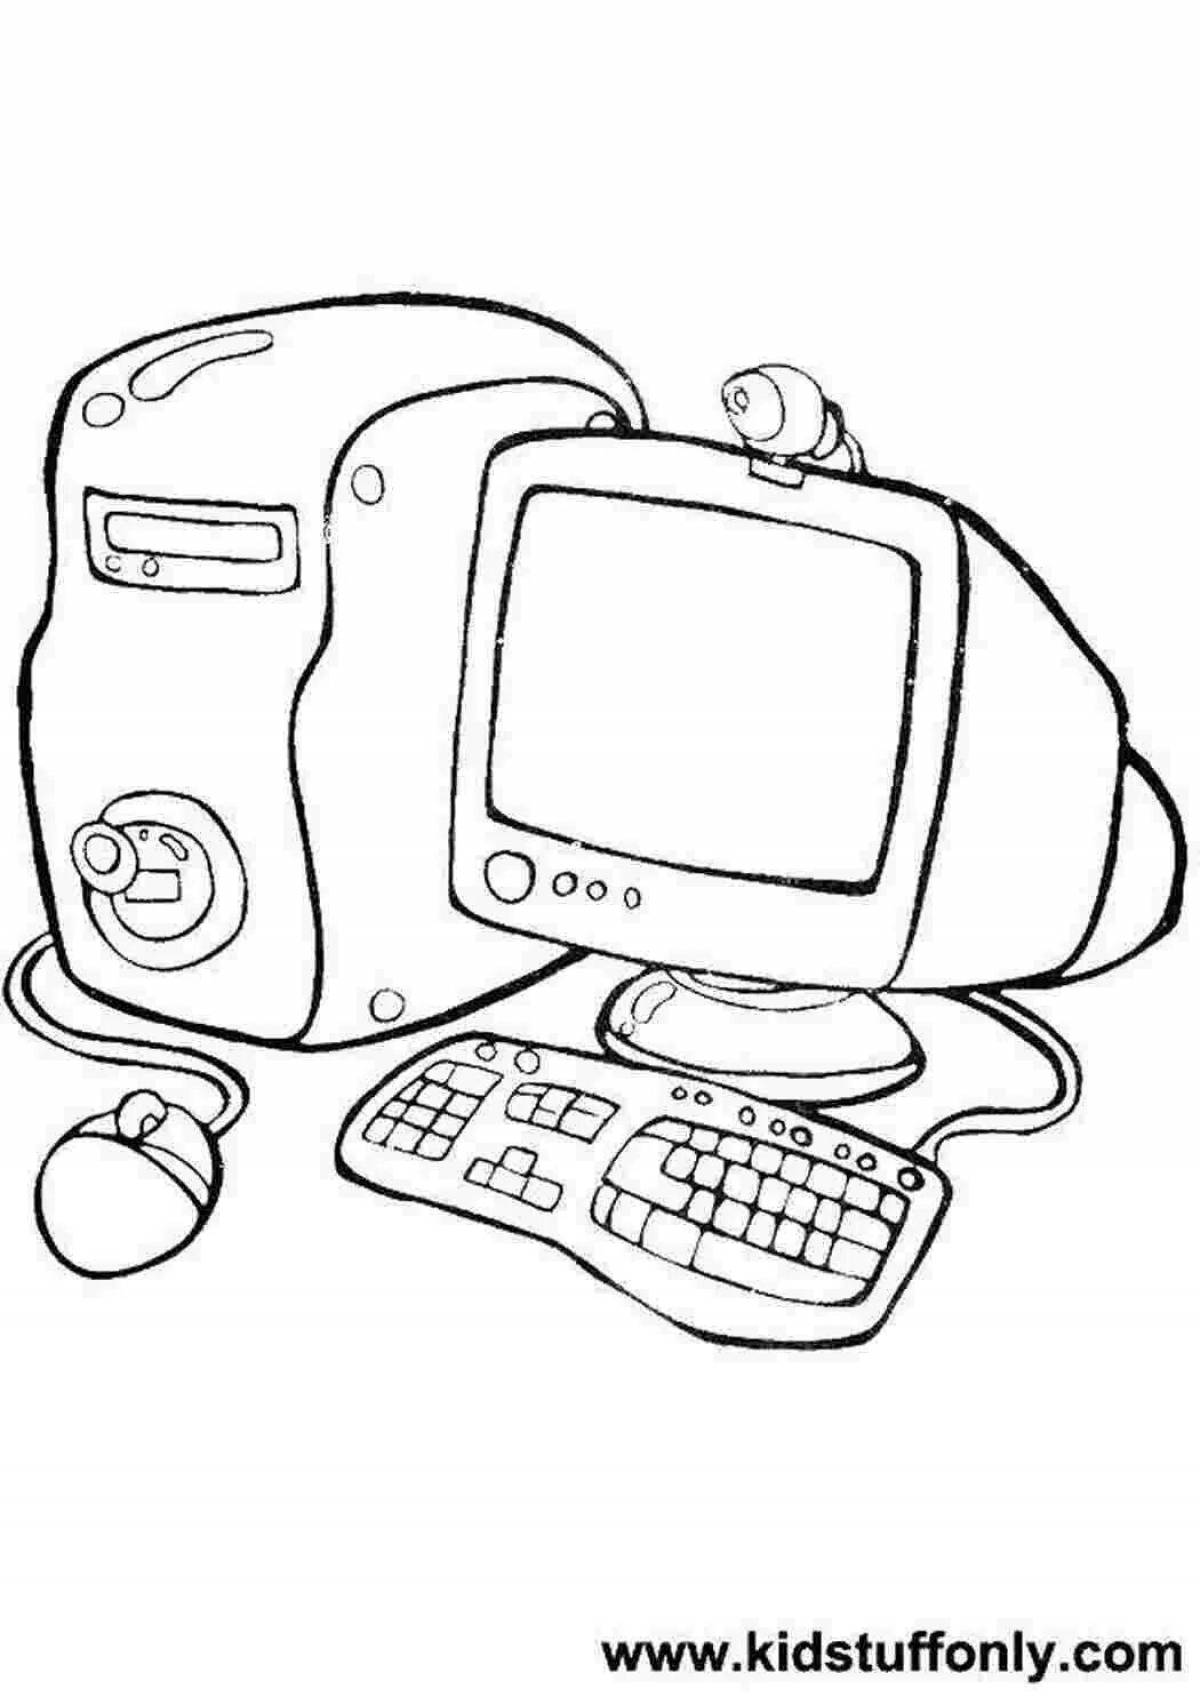 Grand coloring page no internet on phone